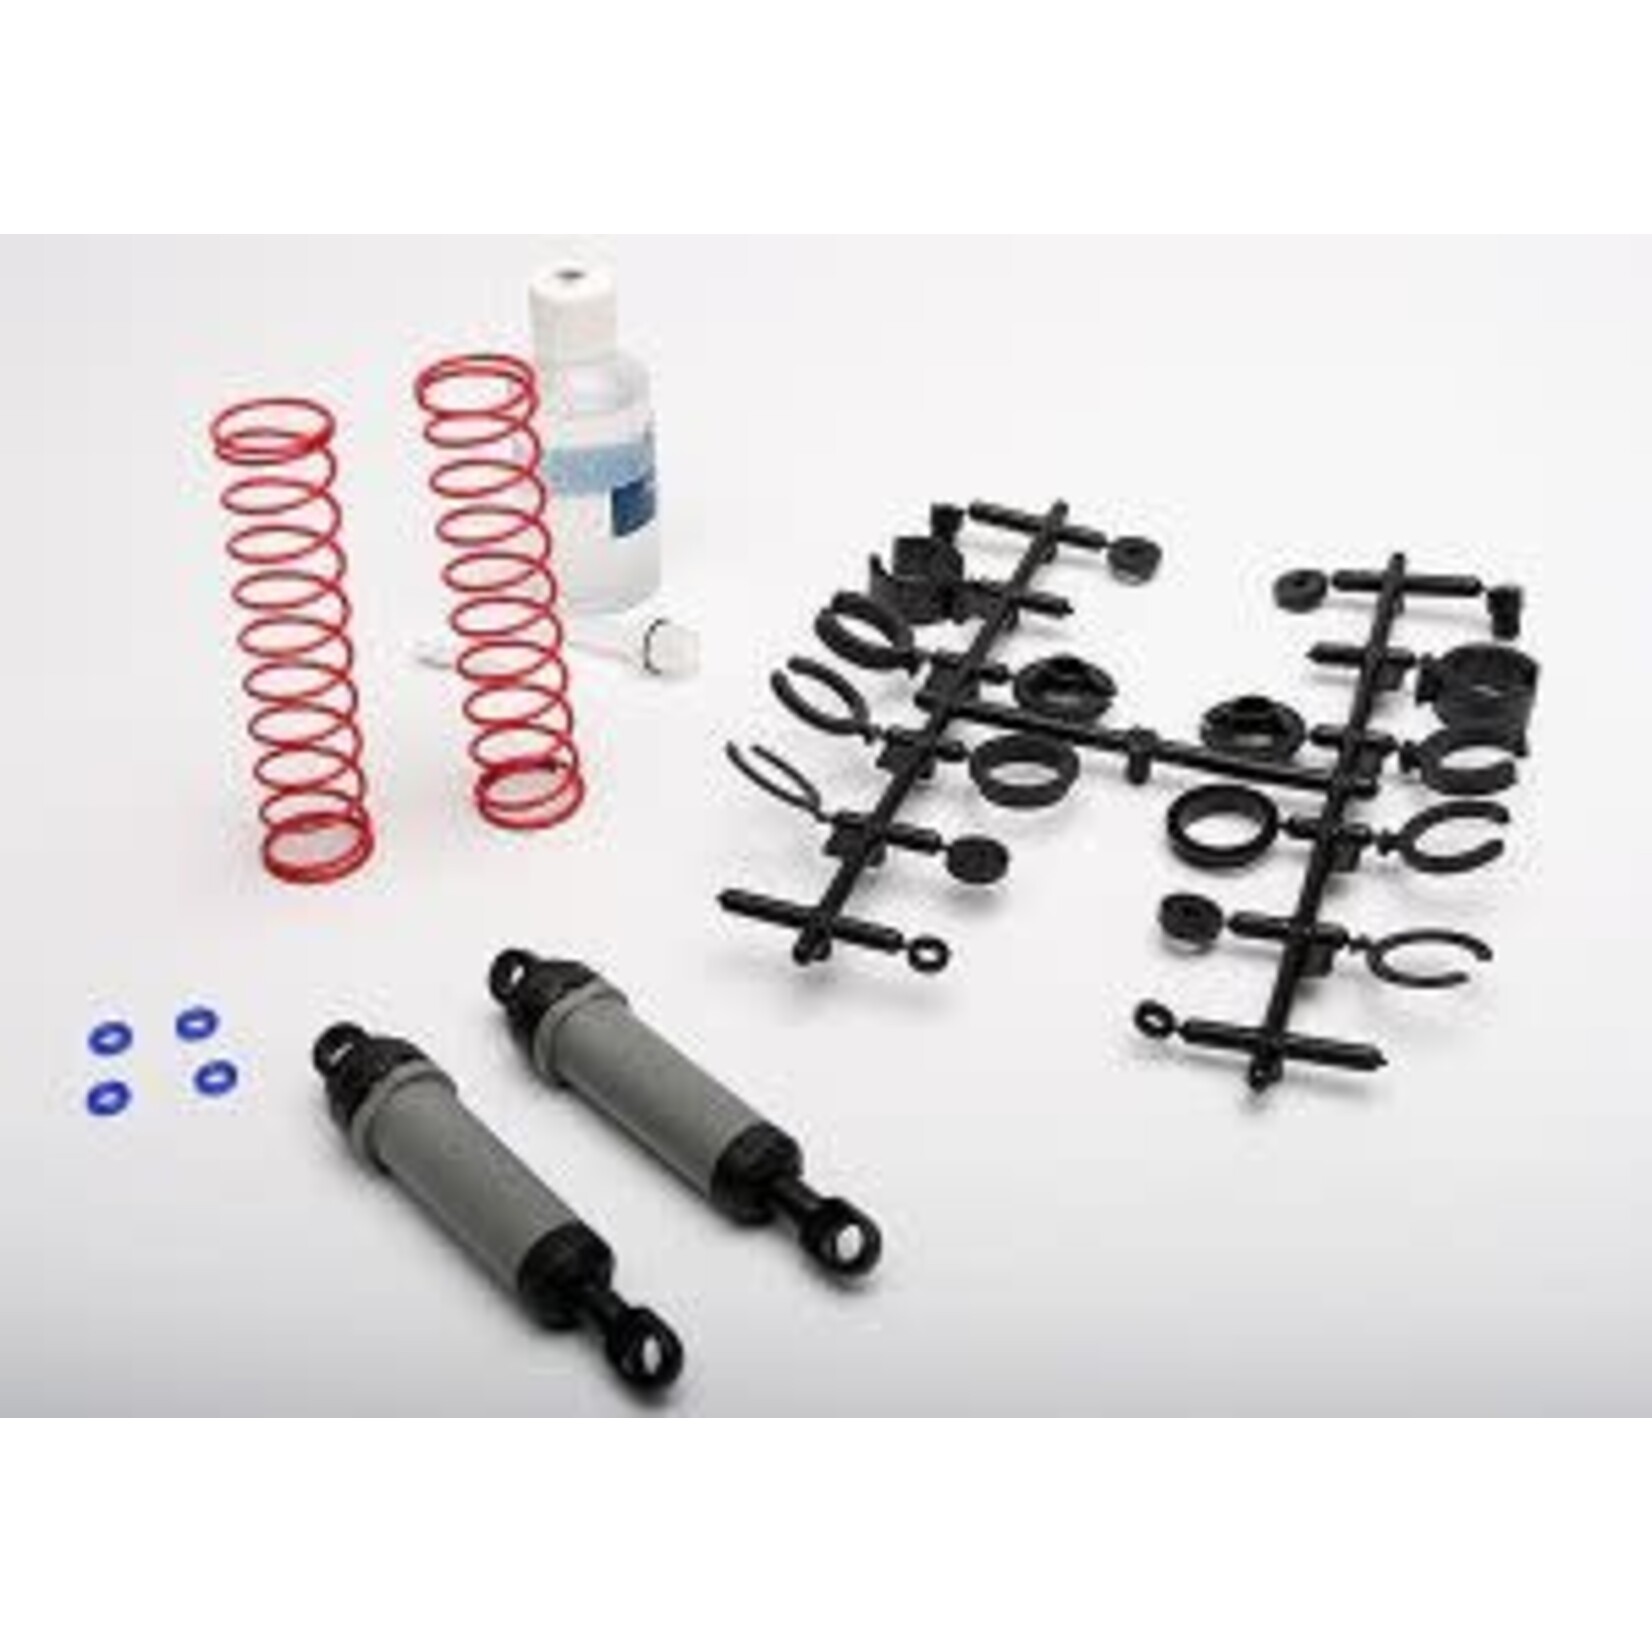 Traxxas 3762A Ultra Shocks (gray) (xx-long) (complete w/ spring pre-load spacers & springs) (rear) (2)